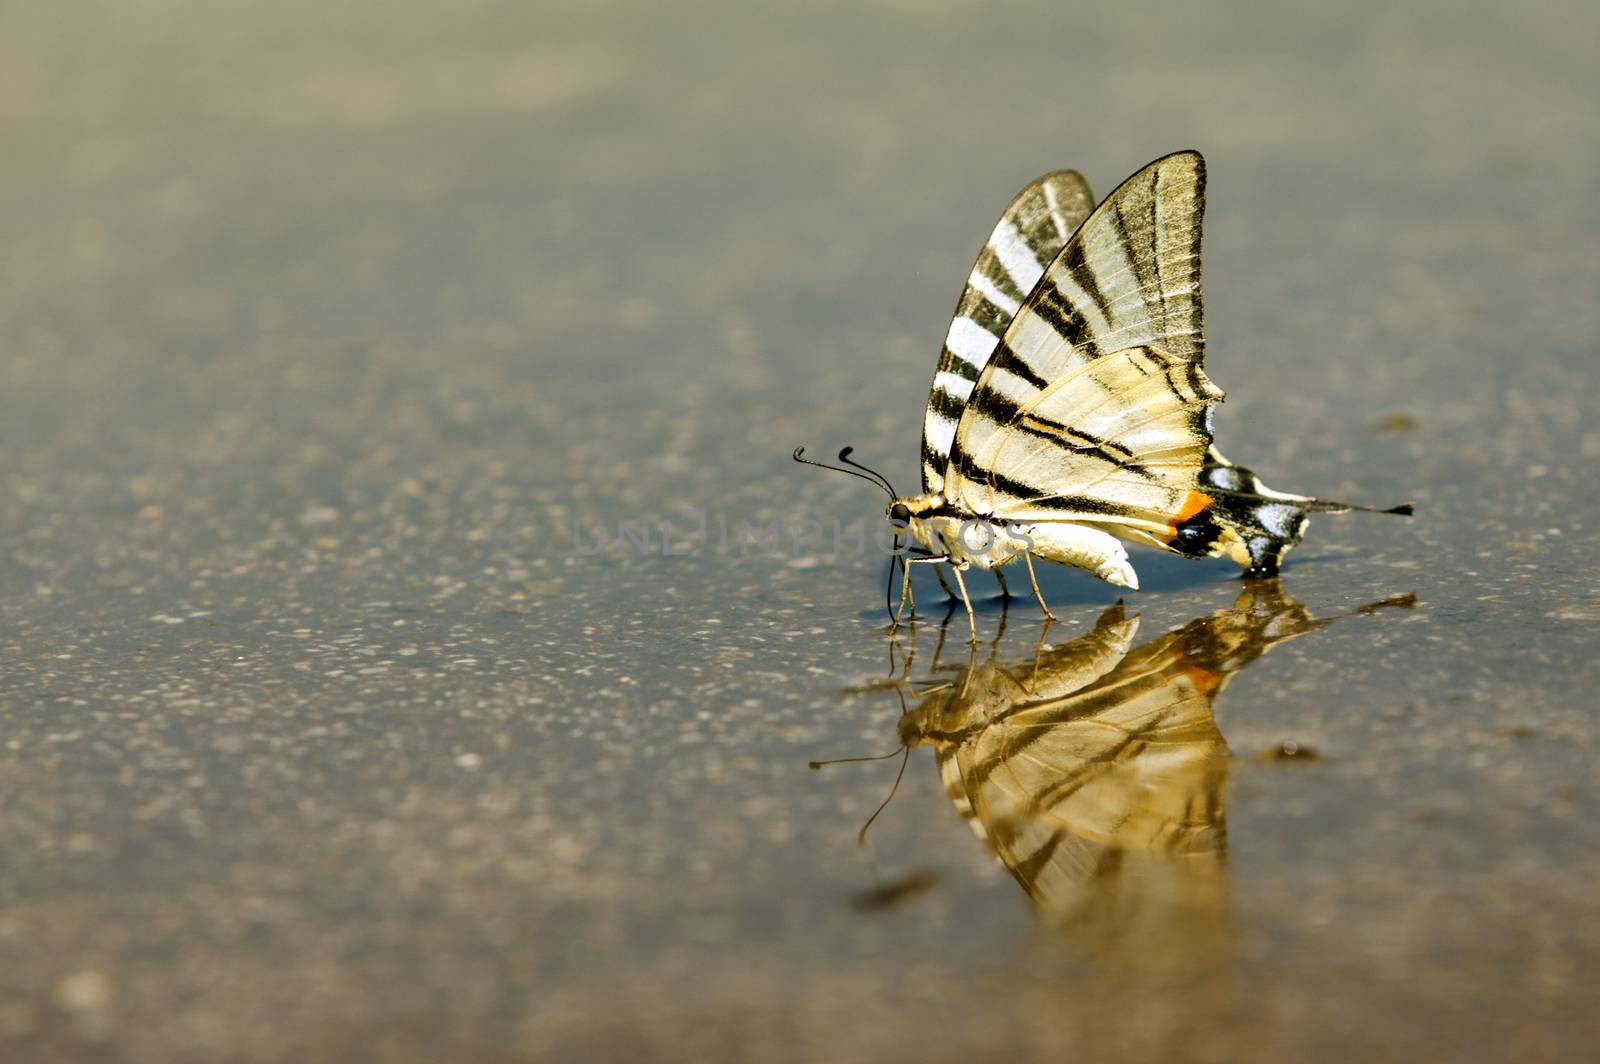 Exotic Swallowtail butterfly who drinks water by Portokalis